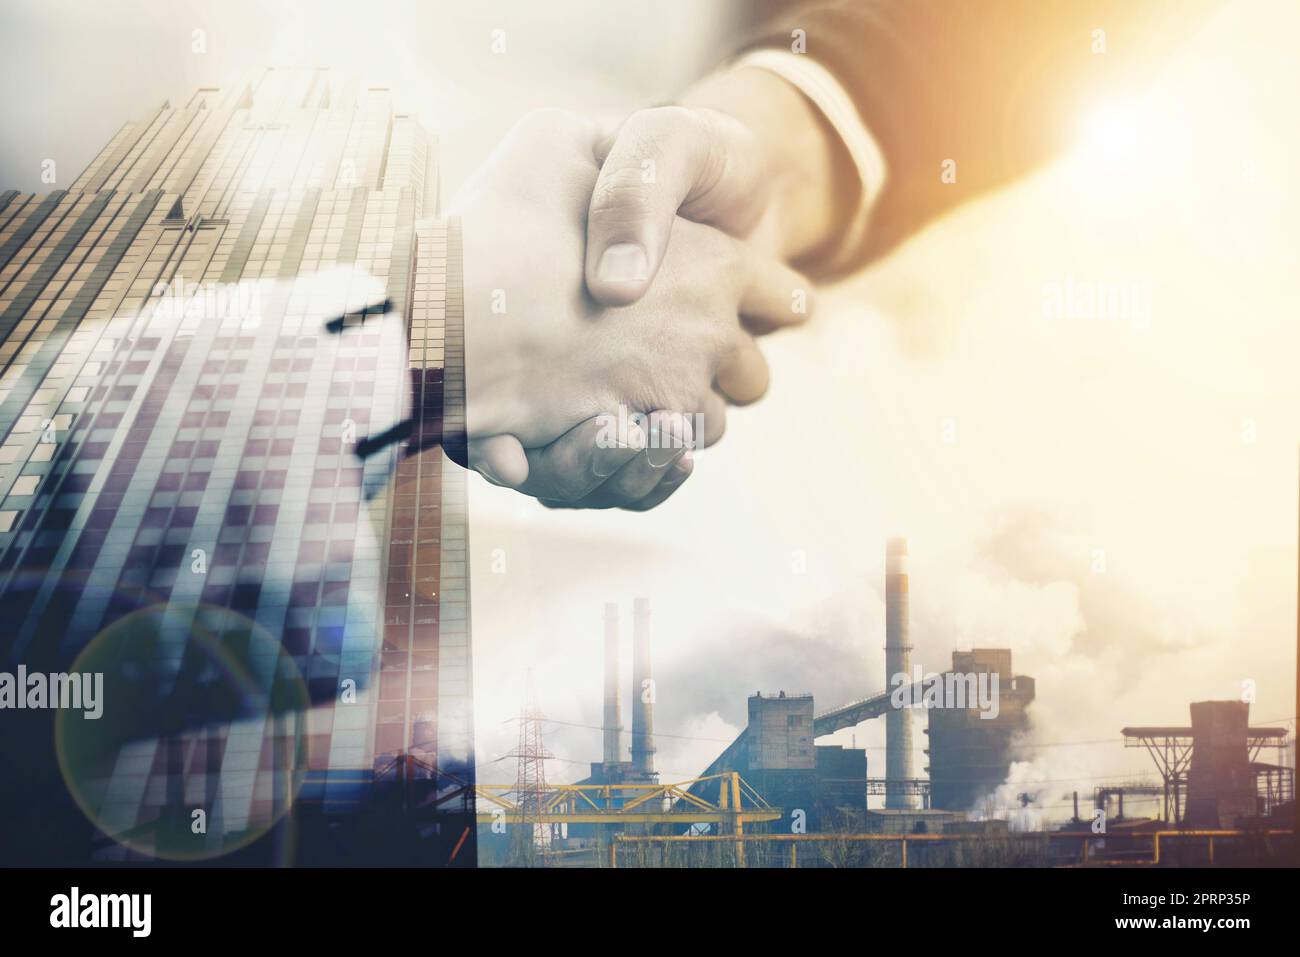 Business in the city. Multiple exposure shot of two businesspeople shaking hands over a city. Stock Photo